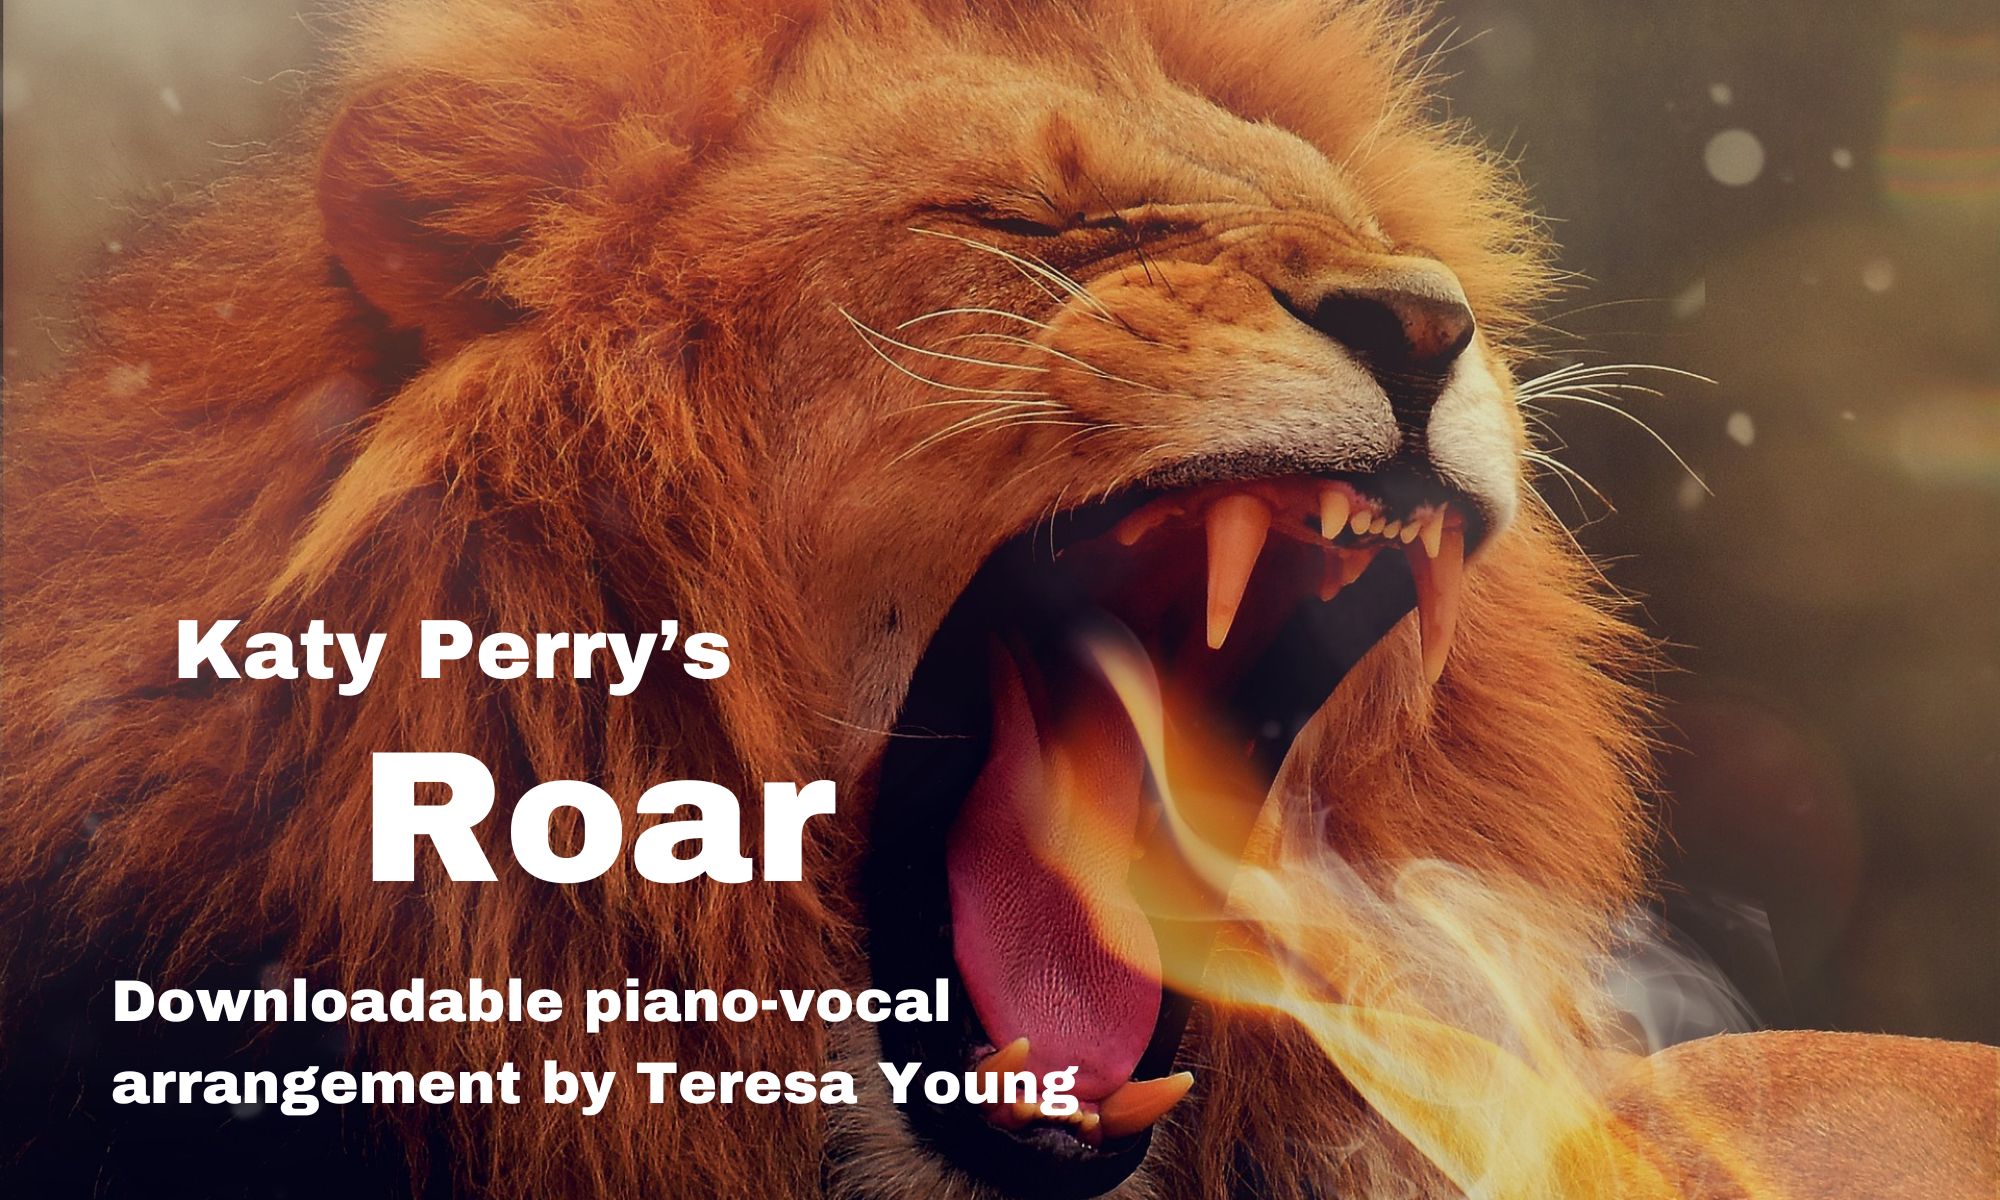 Katy Perry's Roar, piano-vocal sheet music arranged by Teresa Young